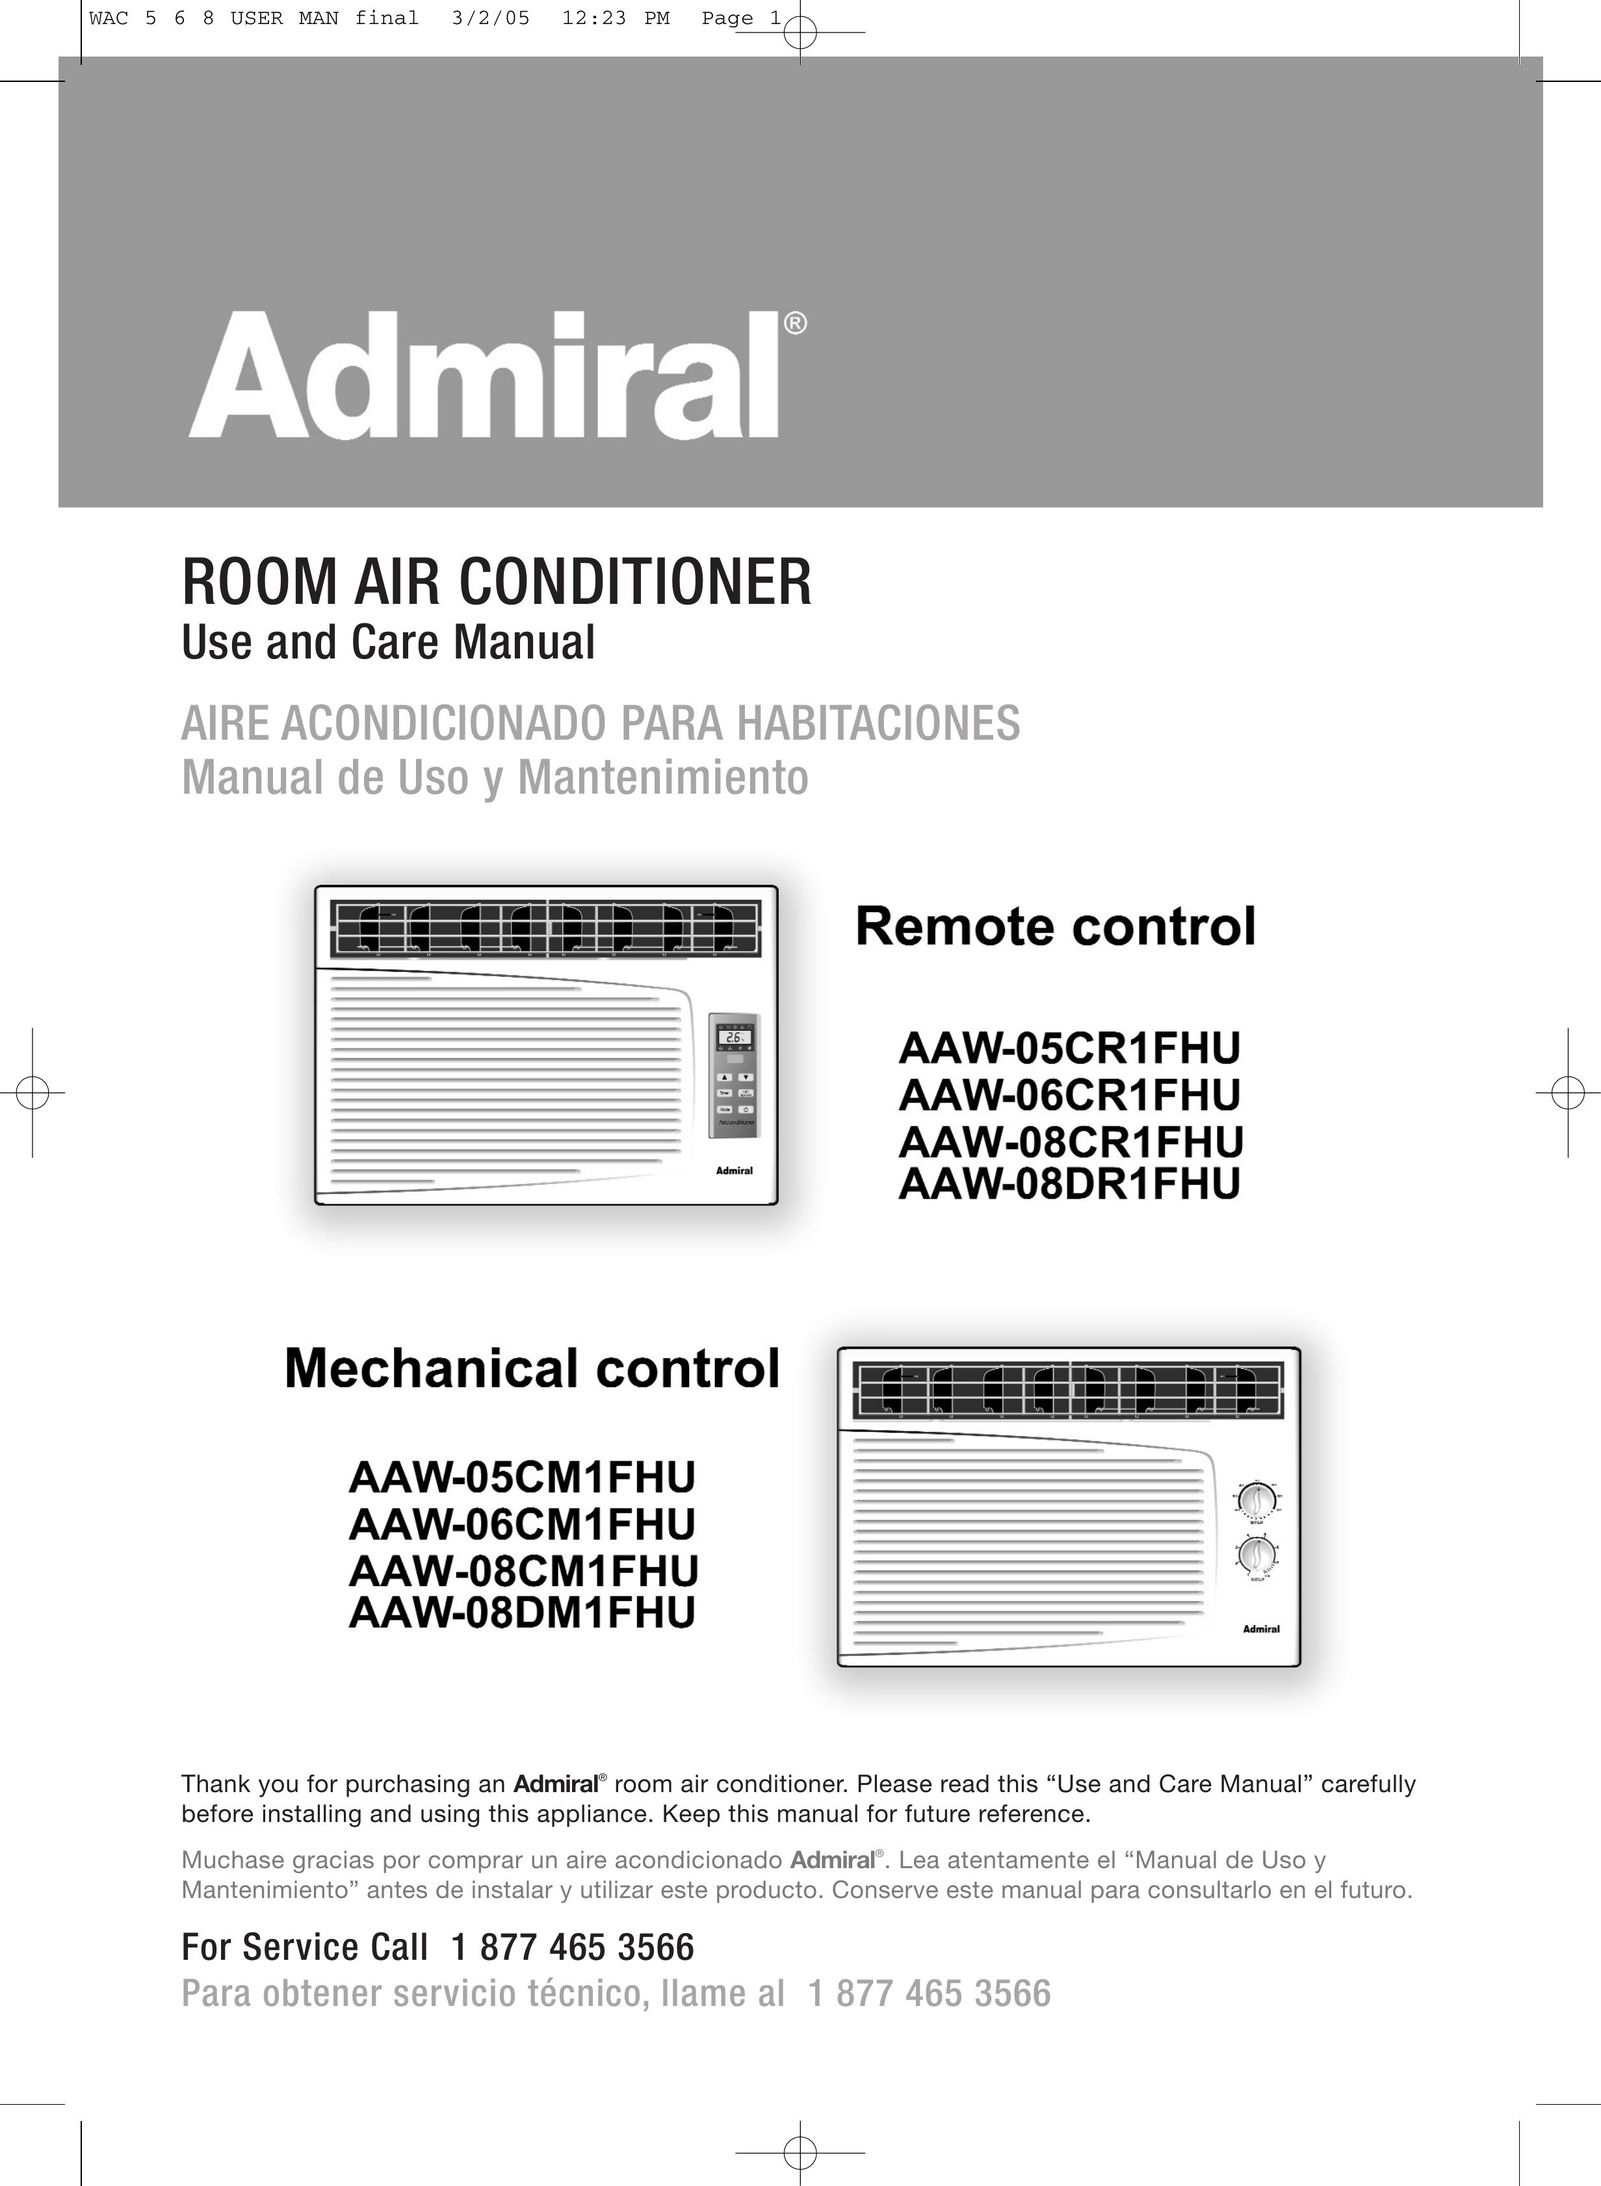 Admiral AAW-08CR1FHU Air Conditioner User Manual (Page 1)